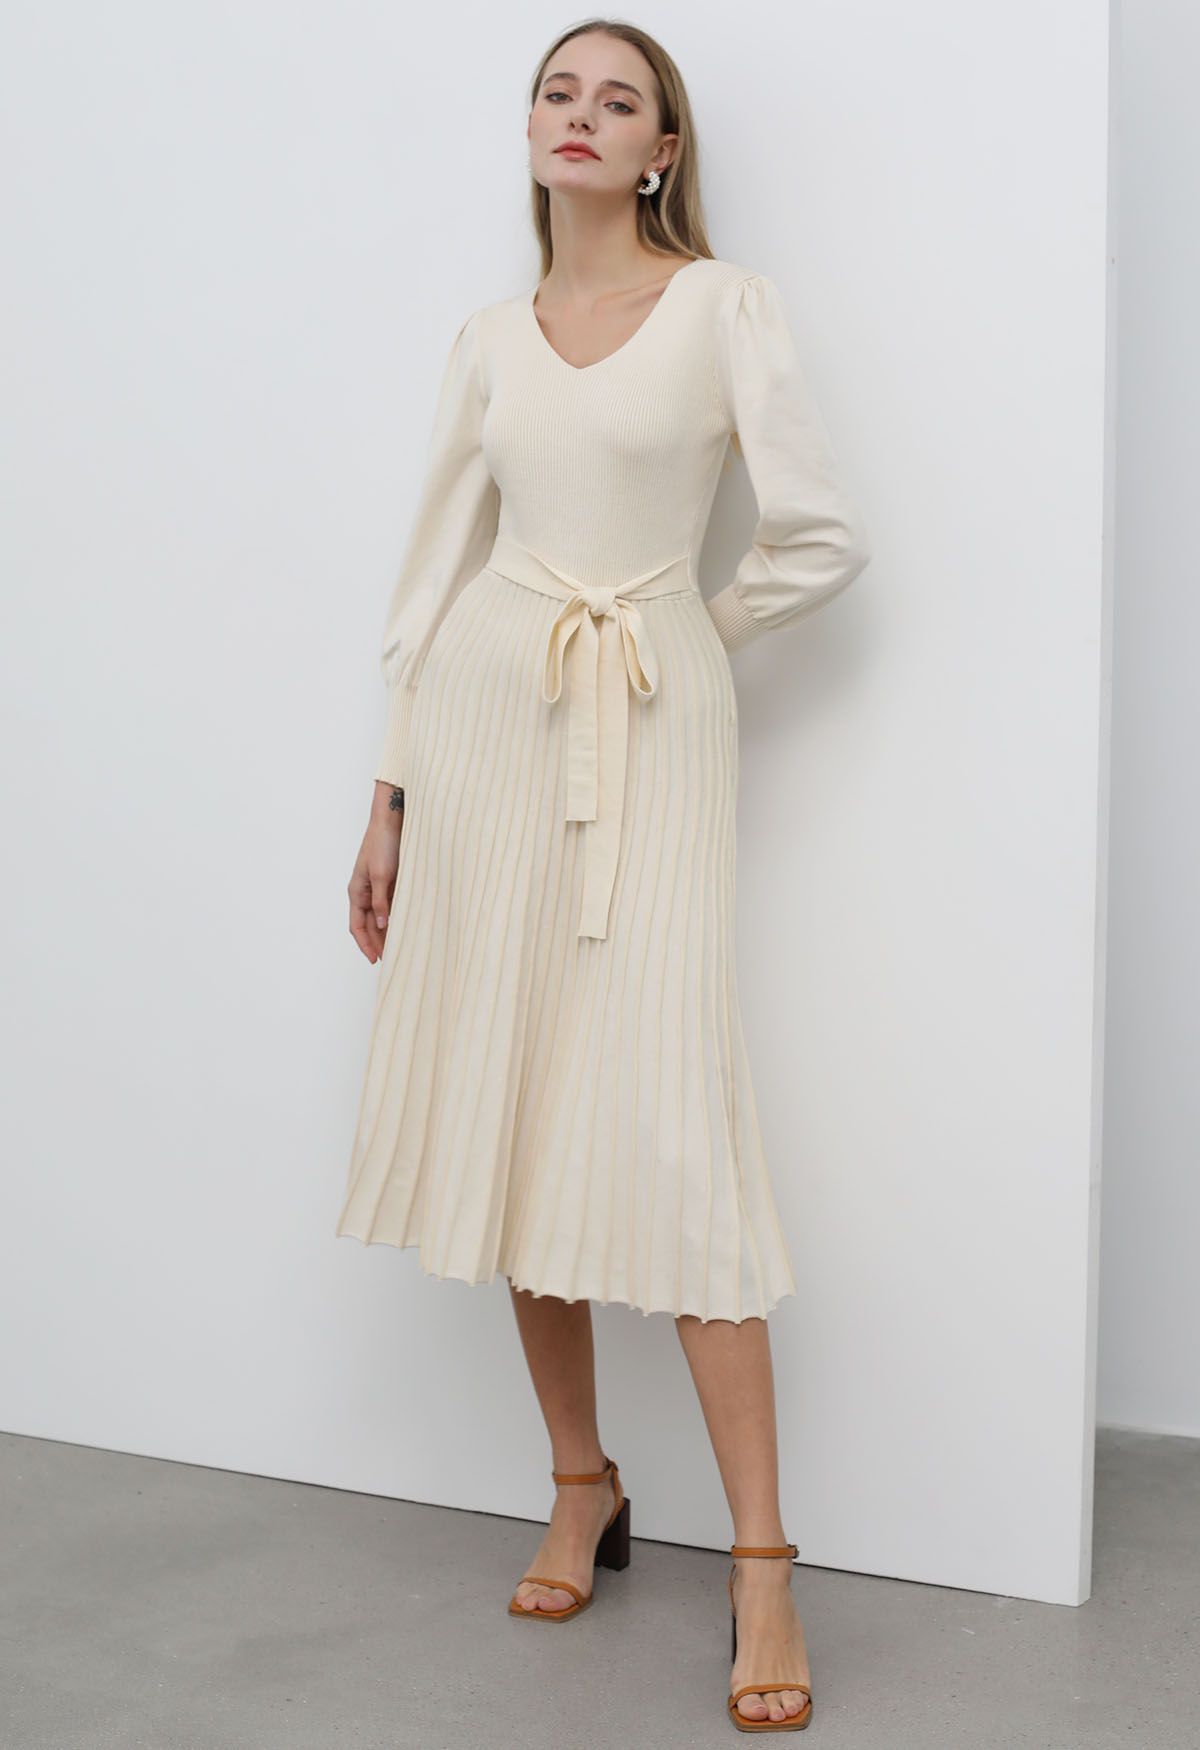 Captivating V-Neck Tie Waist Pleated Knit Dress in Cream